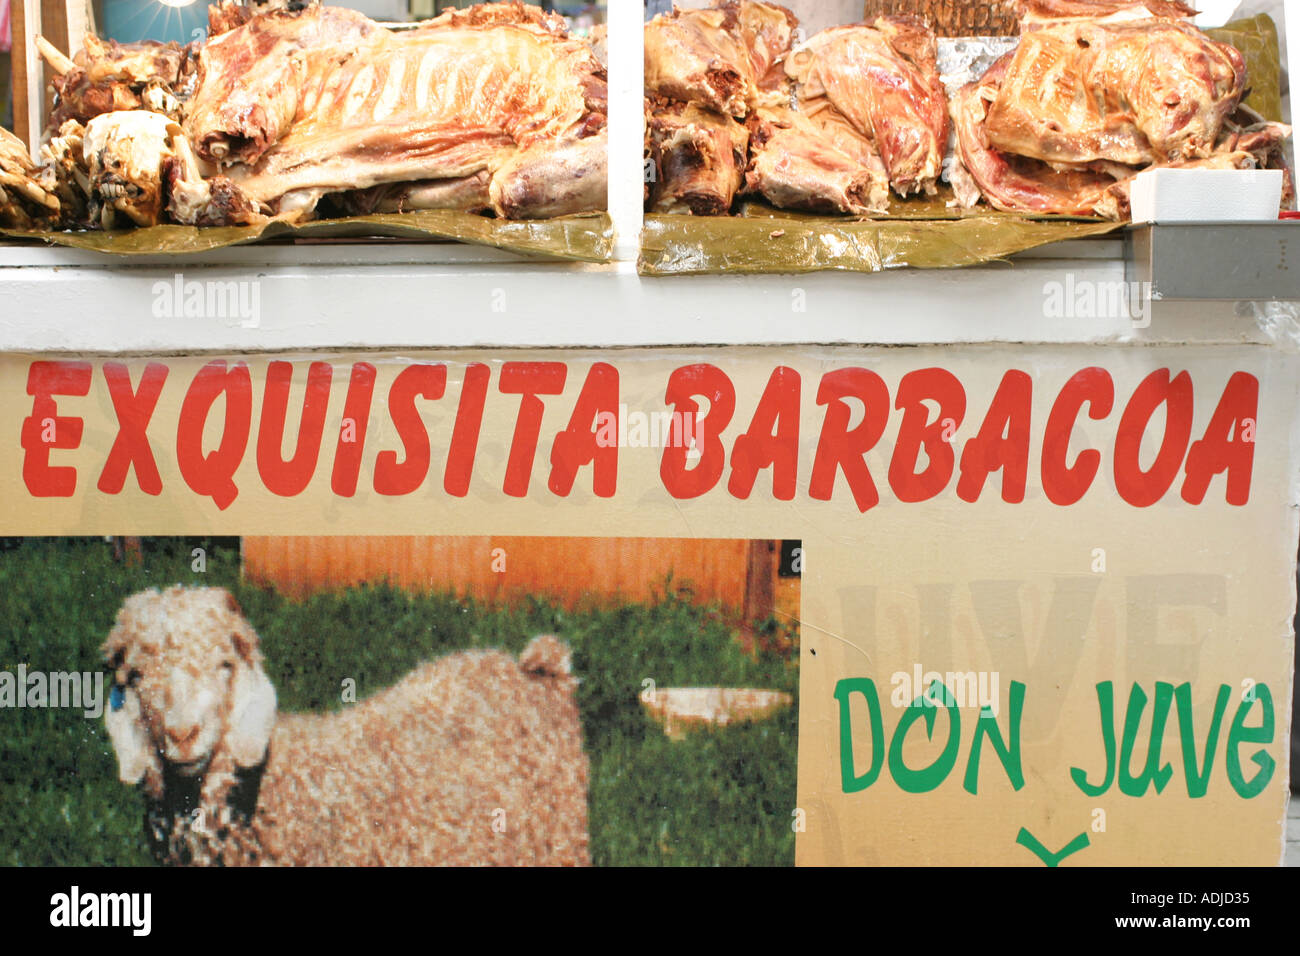 Barbeque stall in a Mexican market Stock Photo